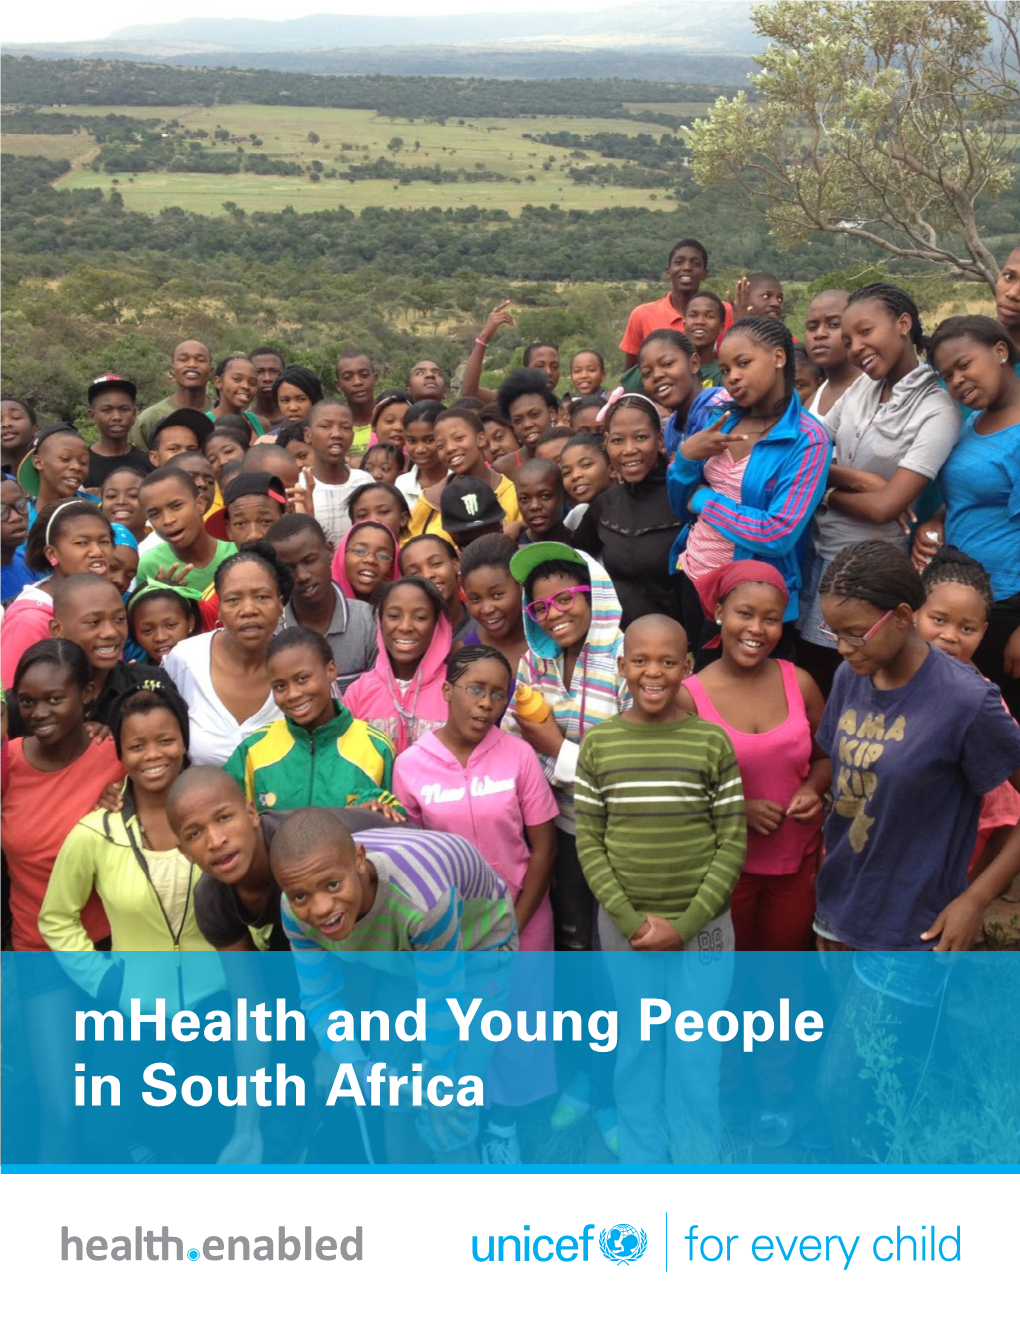 Mhealth and Young People in South Africa